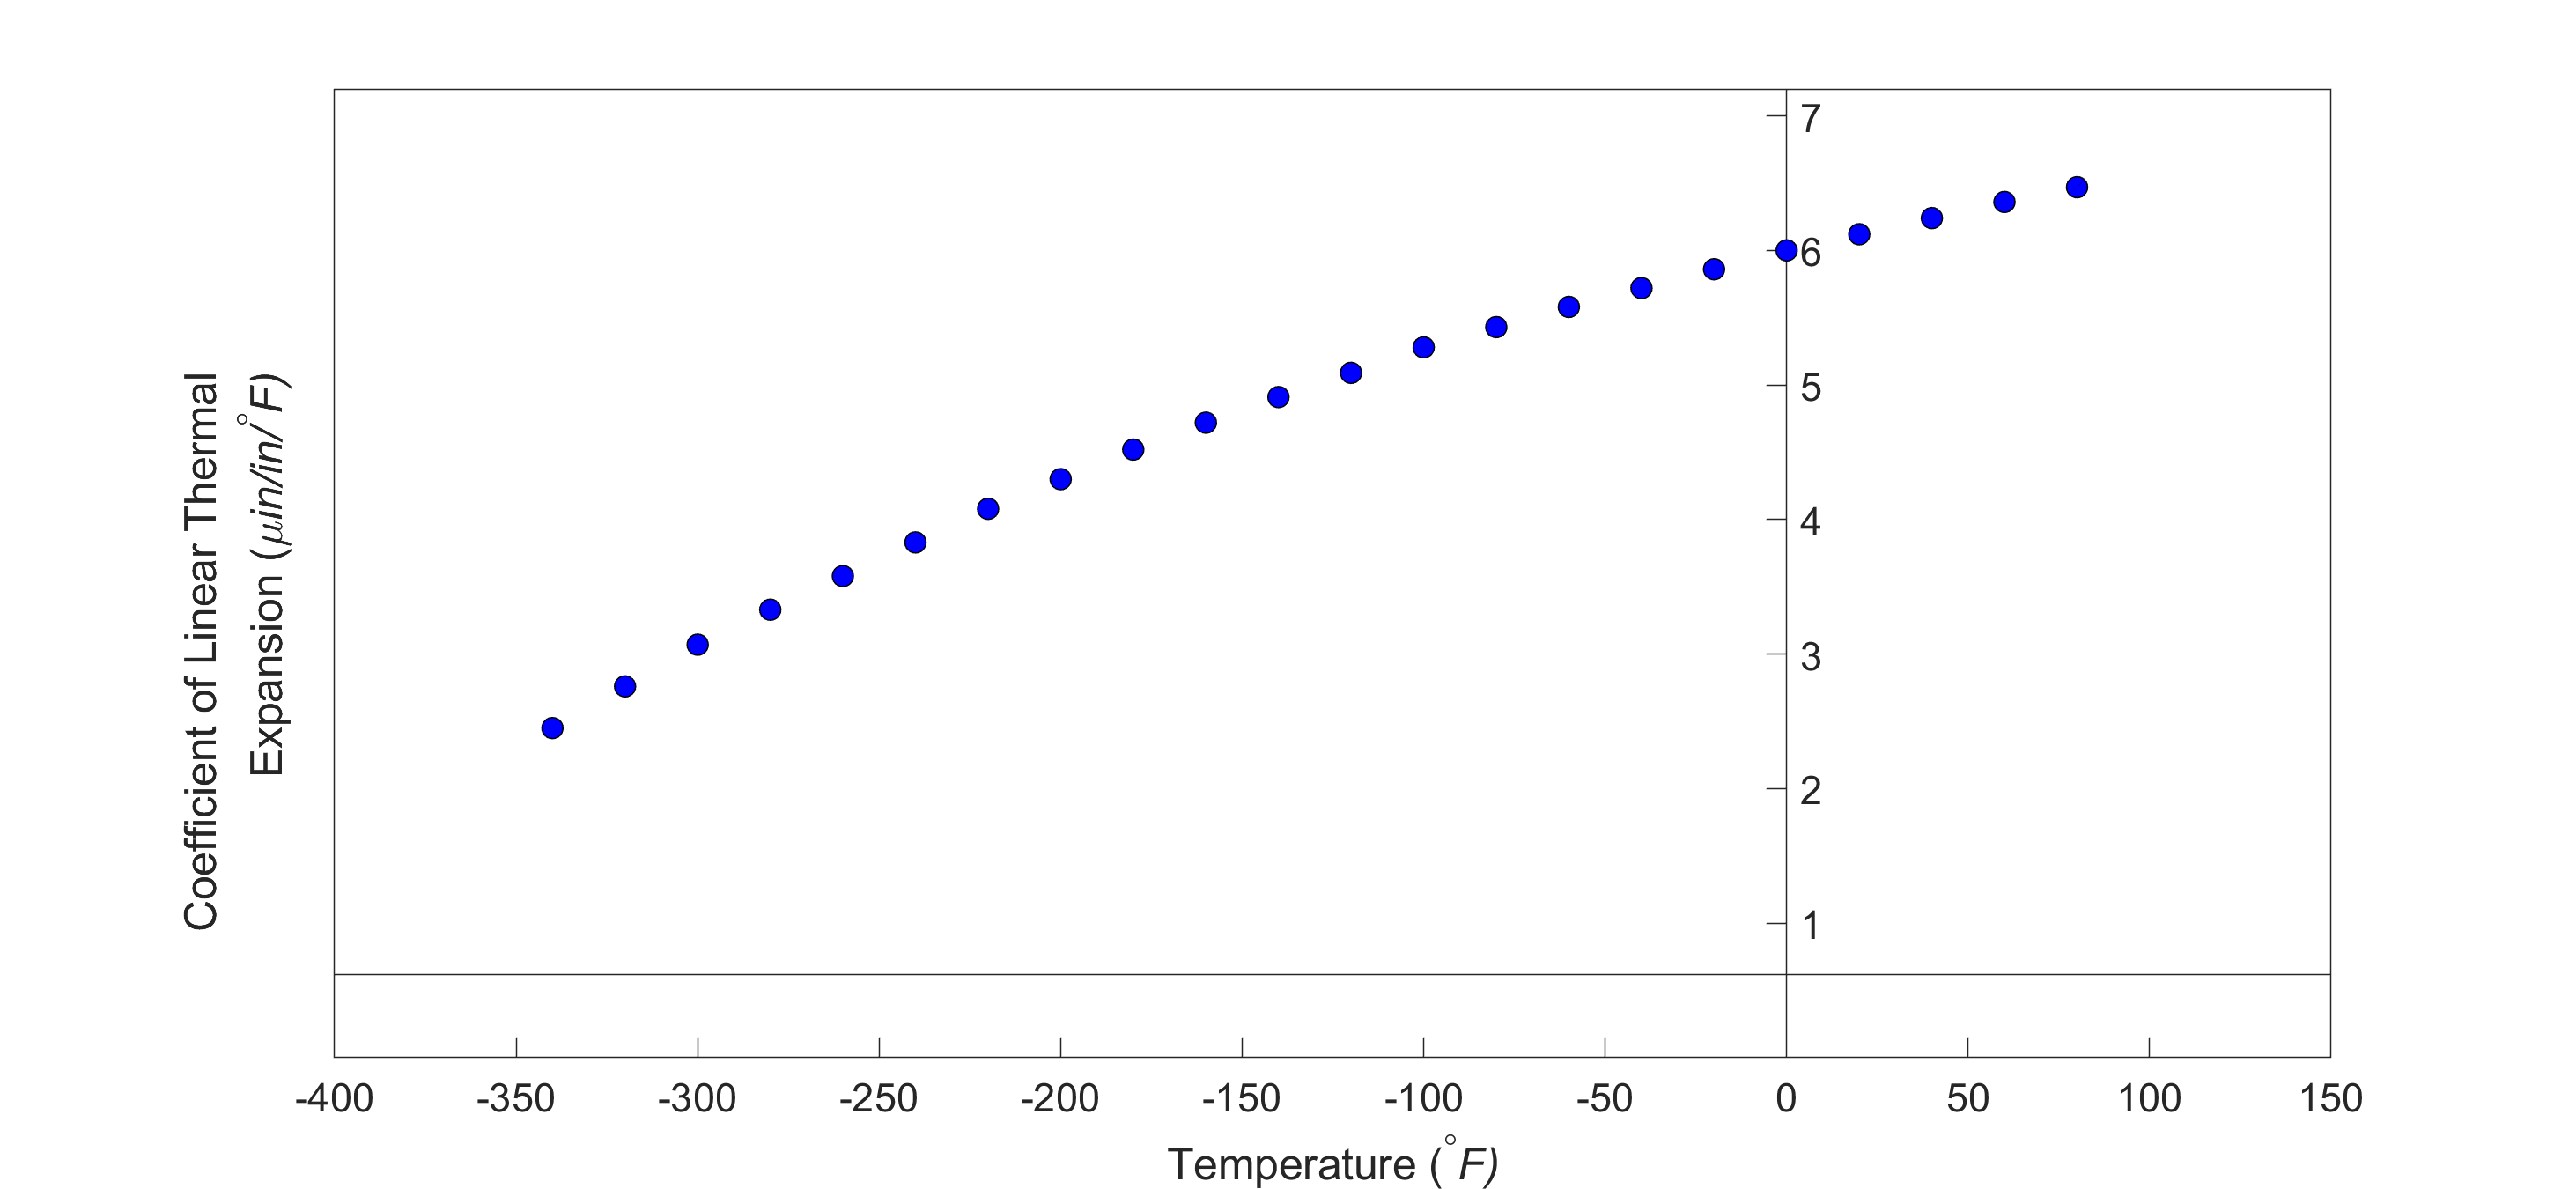 Graph of linear thermal expansion coefficient vs temperature. Thermal expansion increases nonlinearly with increasing temperature.